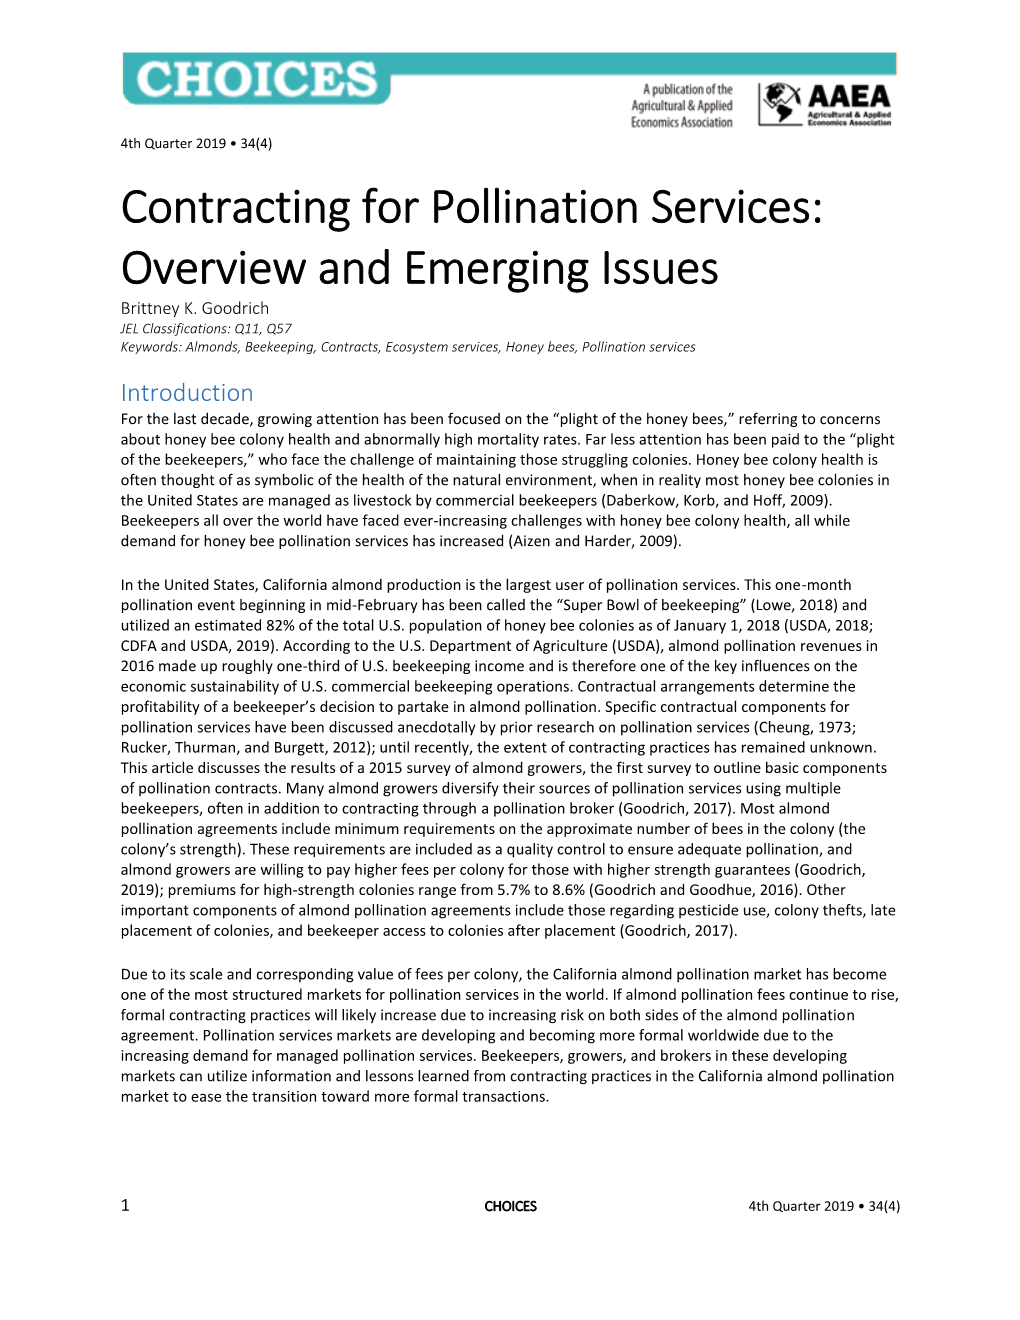 Contracting for Pollination Services: Overview and Emerging Issues Brittney K